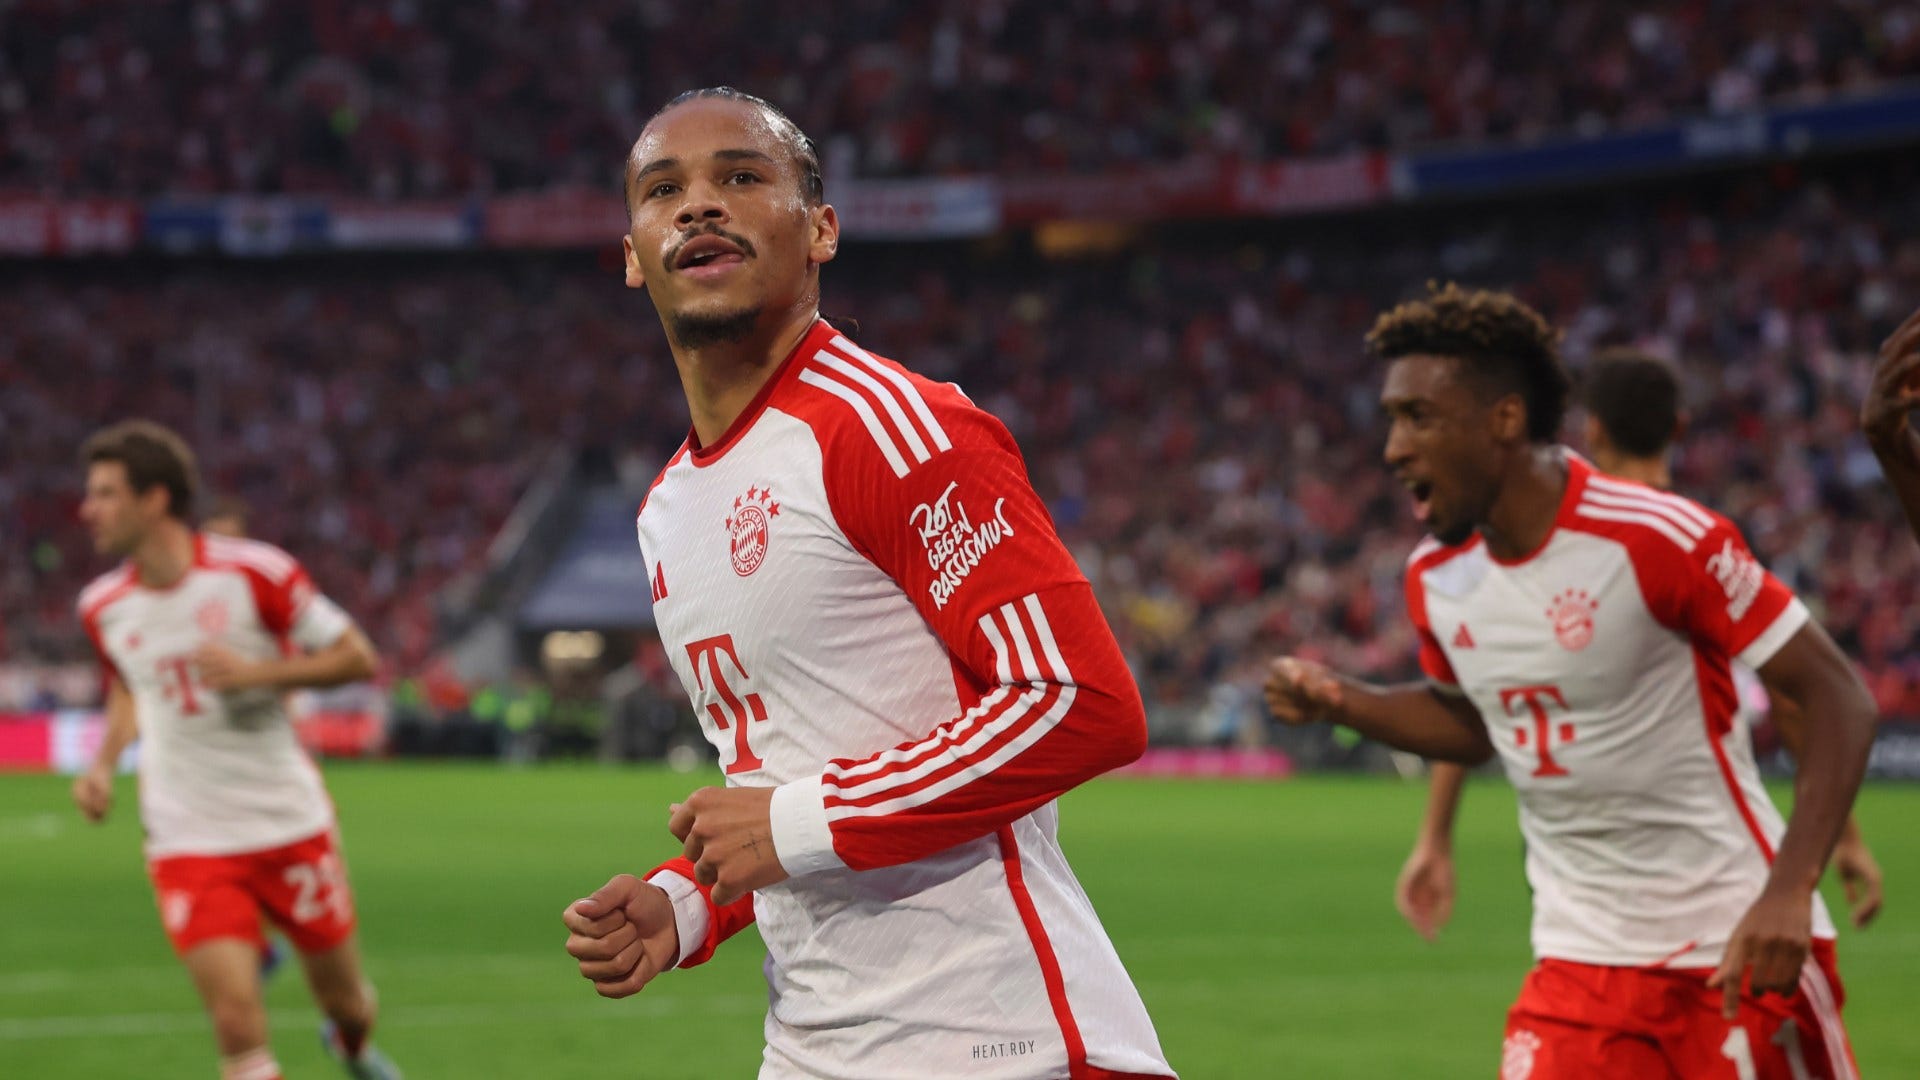 Liverpool make Leroy Sane their No. 1 target to replace Mohamed Salah and are willing to smash transfer record to land Bayern star | Goal.com